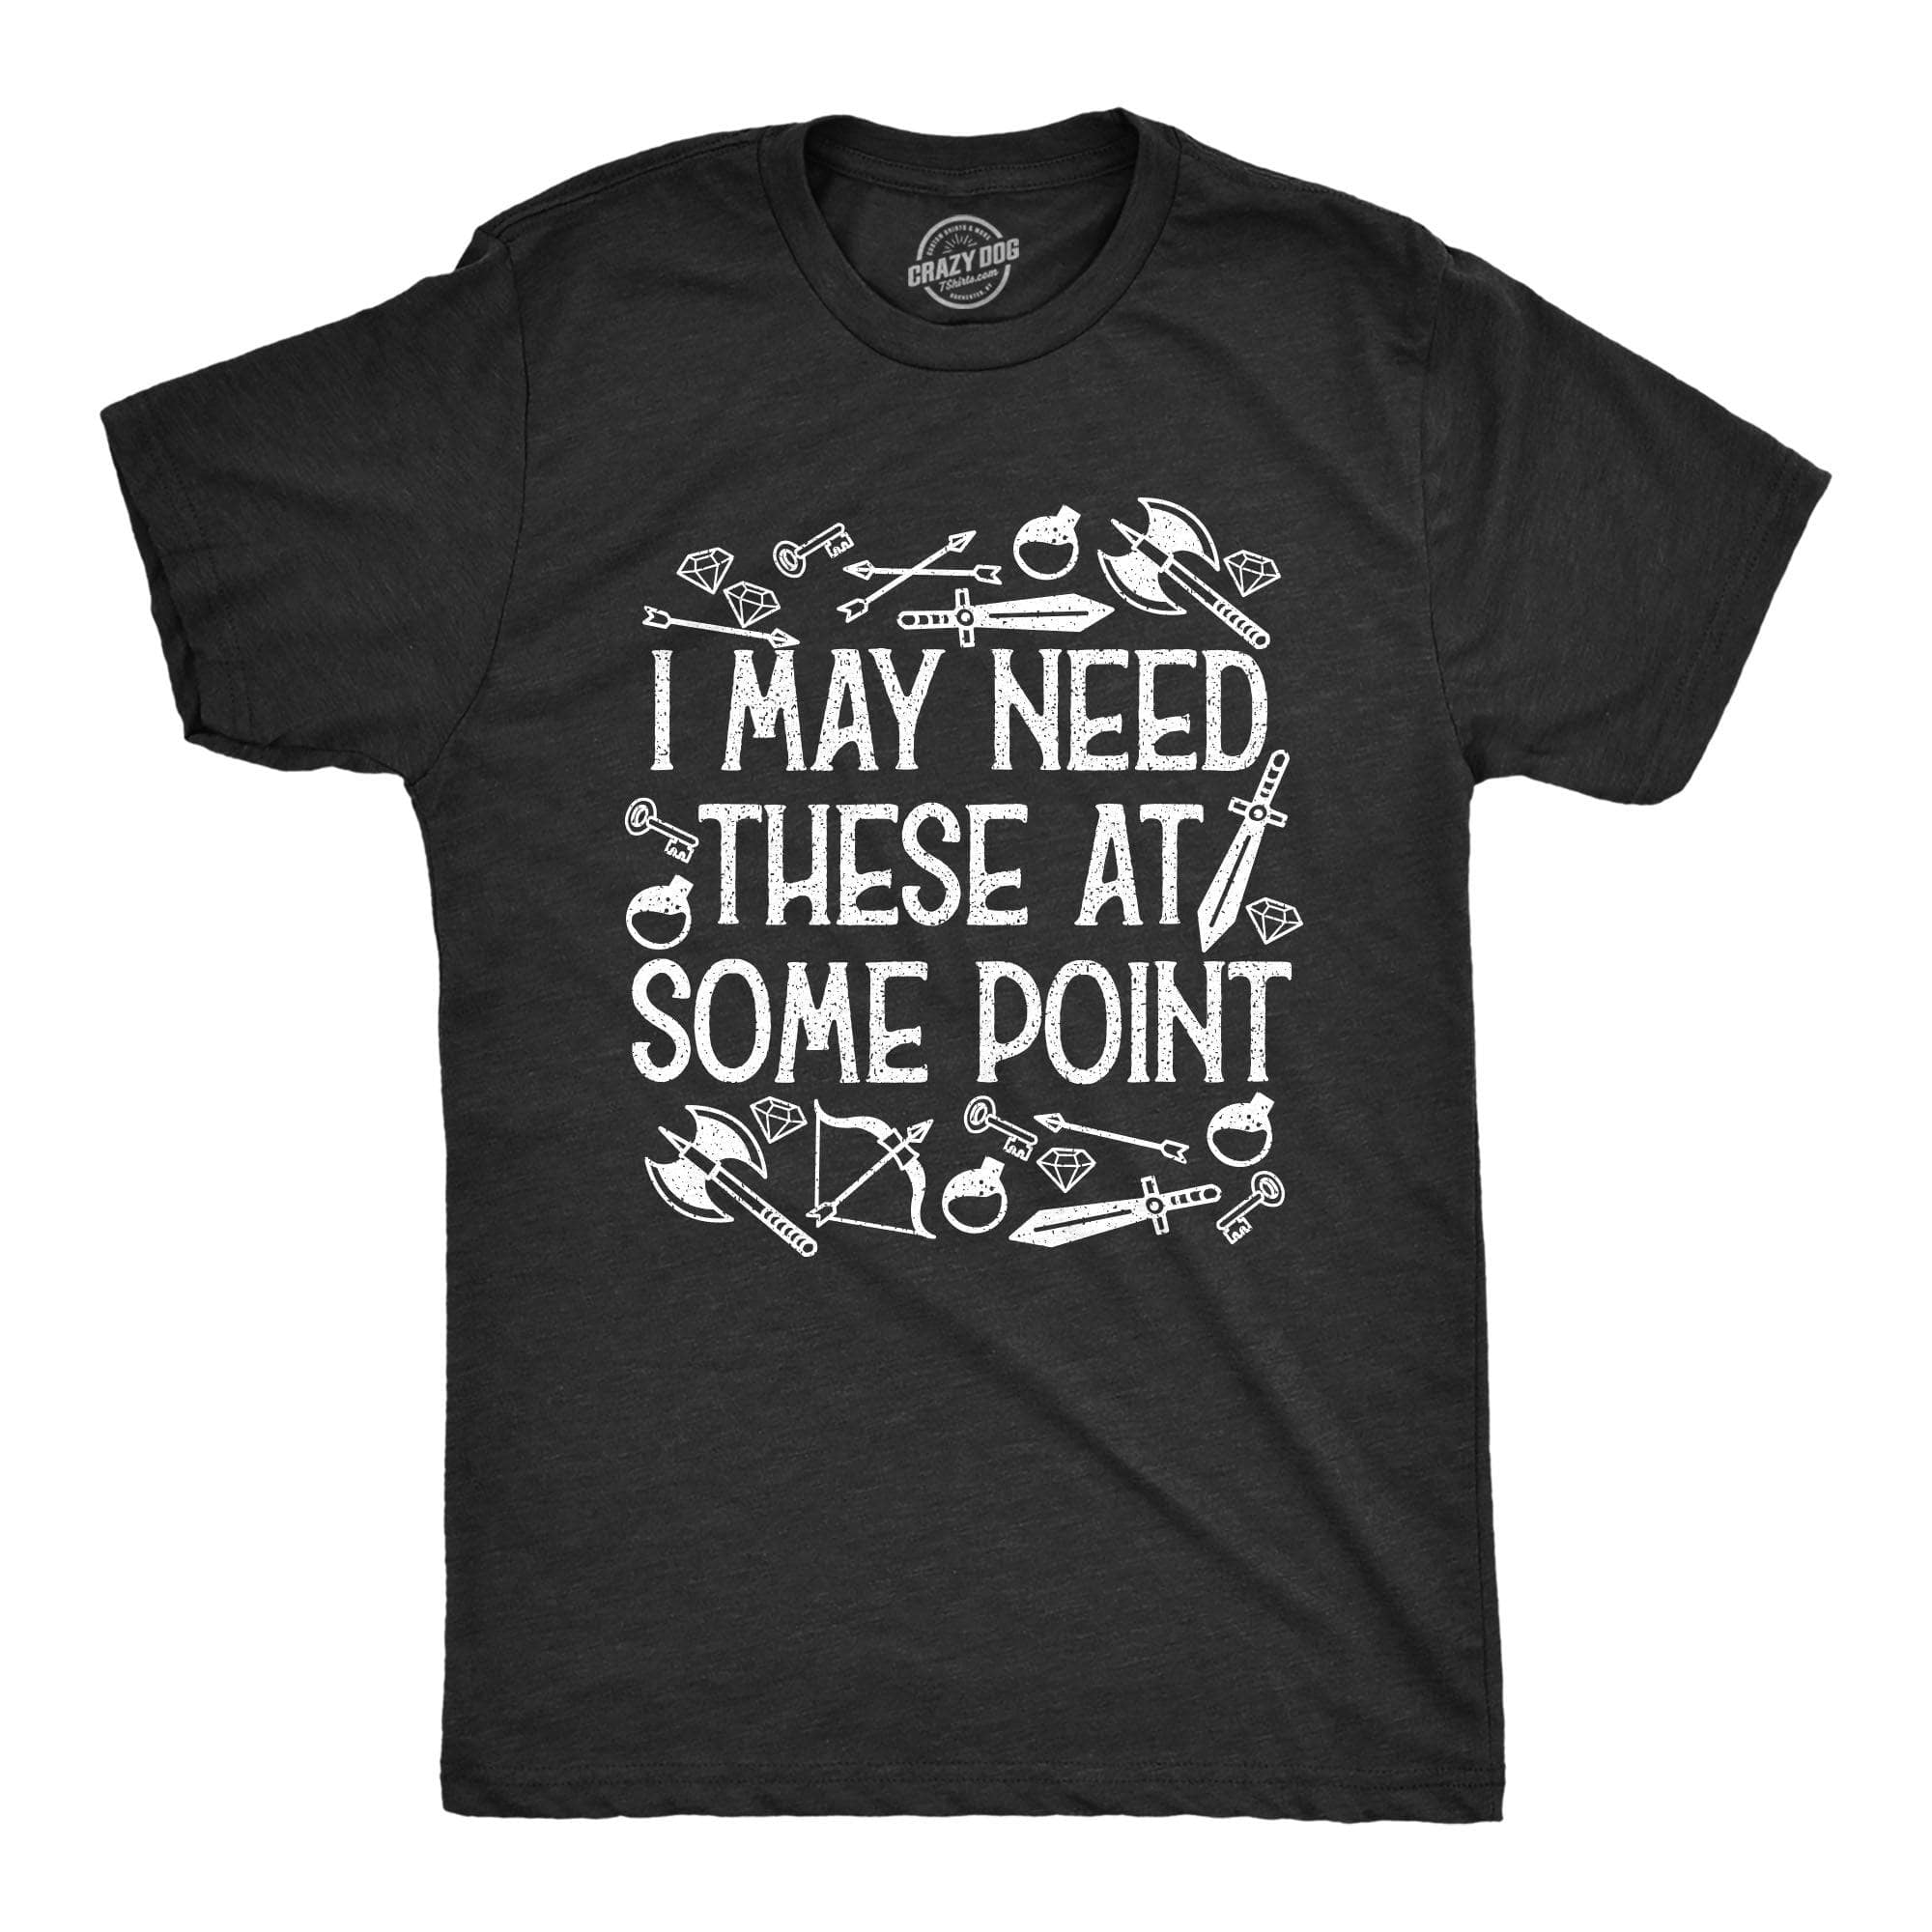 I May Need These At Some Point Men's Tshirt  -  Crazy Dog T-Shirts